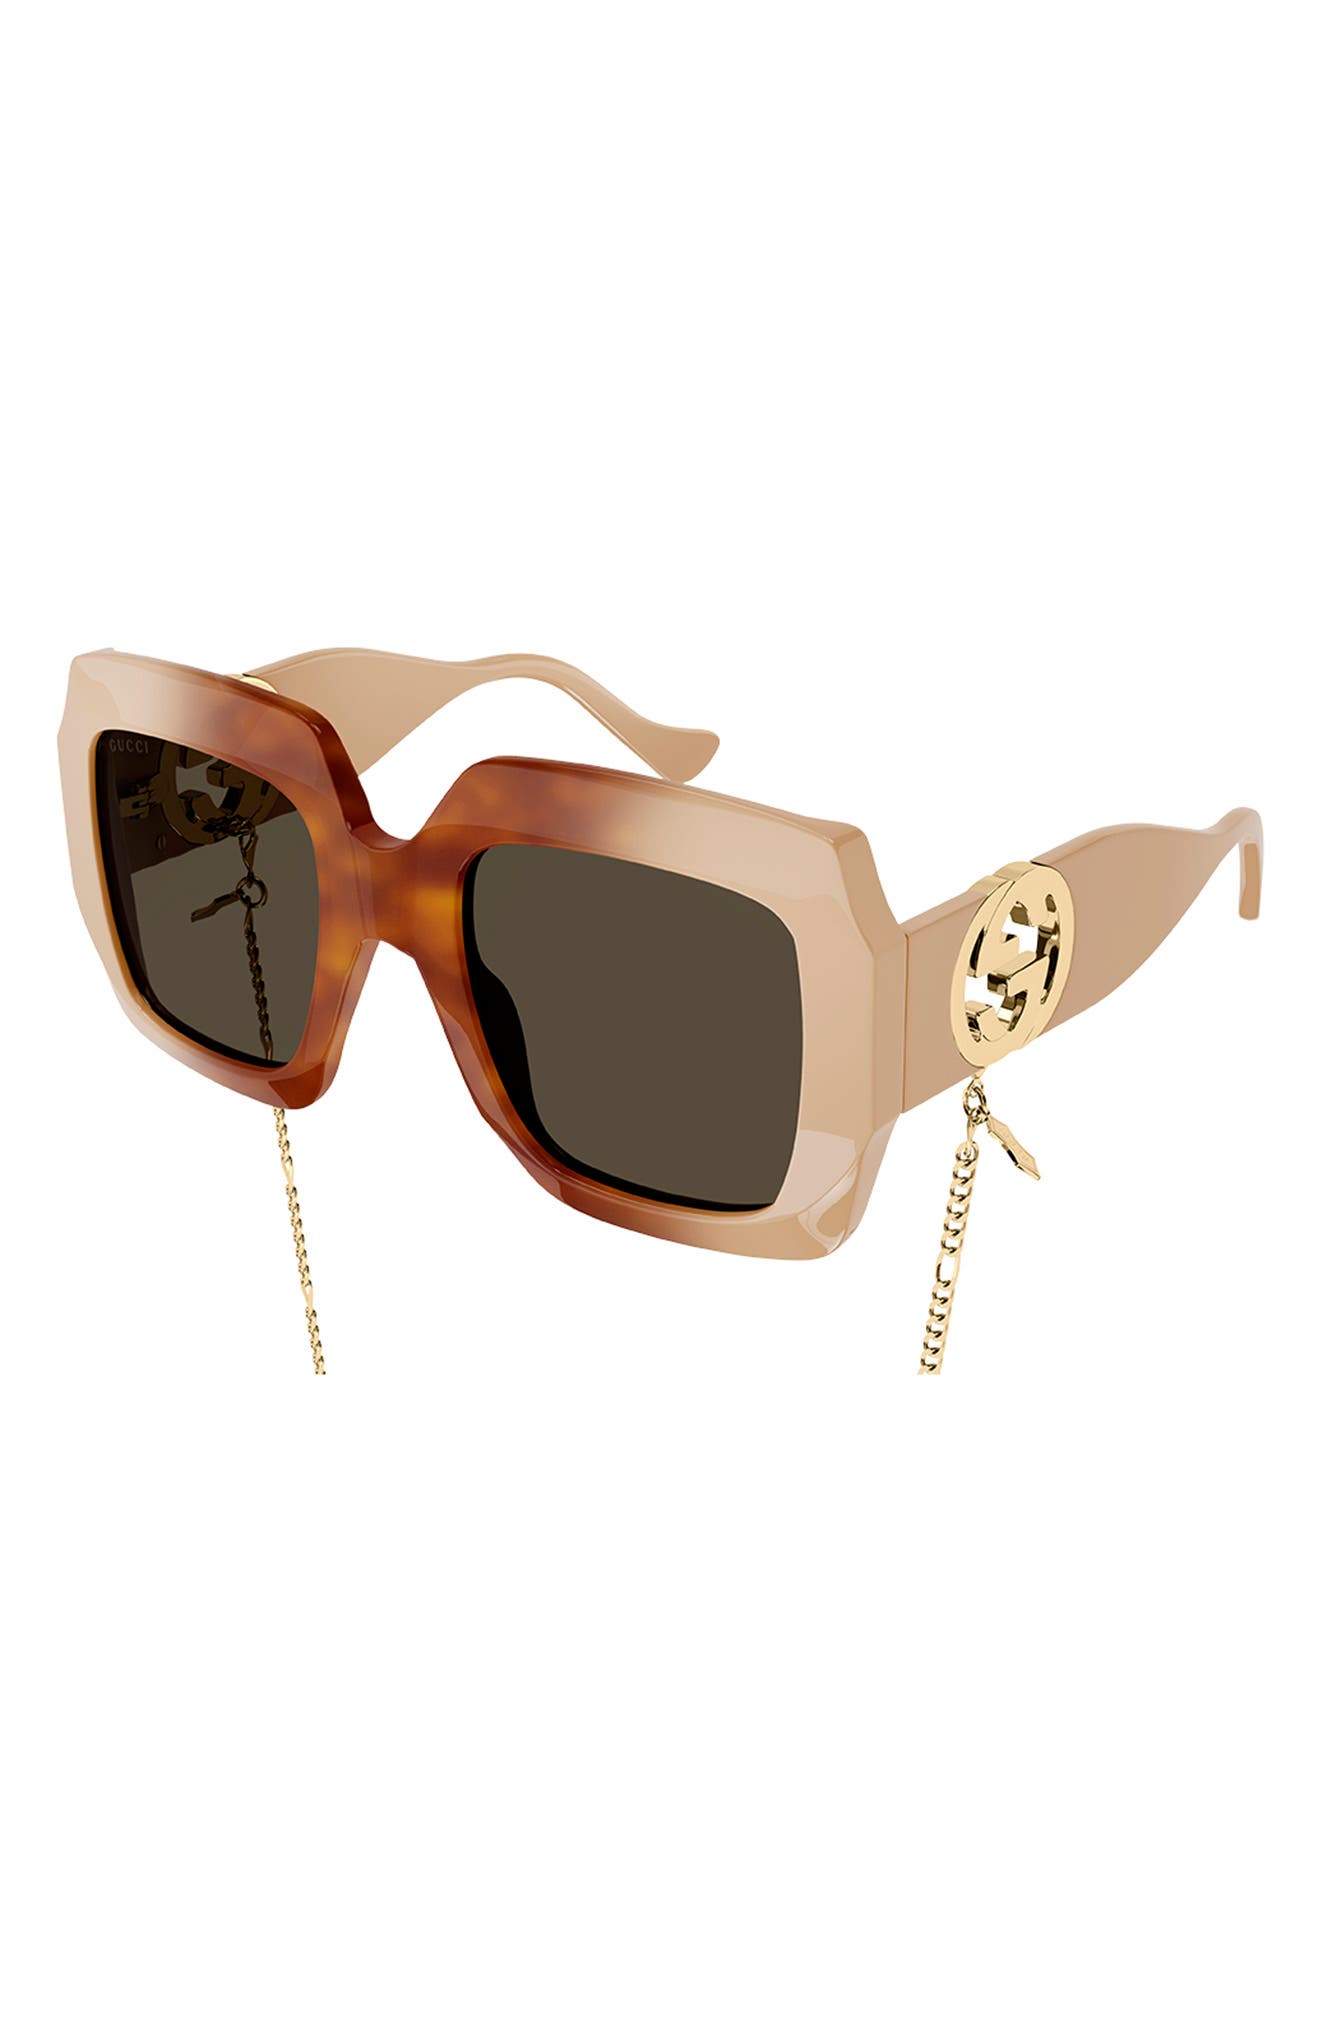 UPC 889652356976 product image for Gucci 54mm Square Sunglasses in Havana at Nordstrom | upcitemdb.com